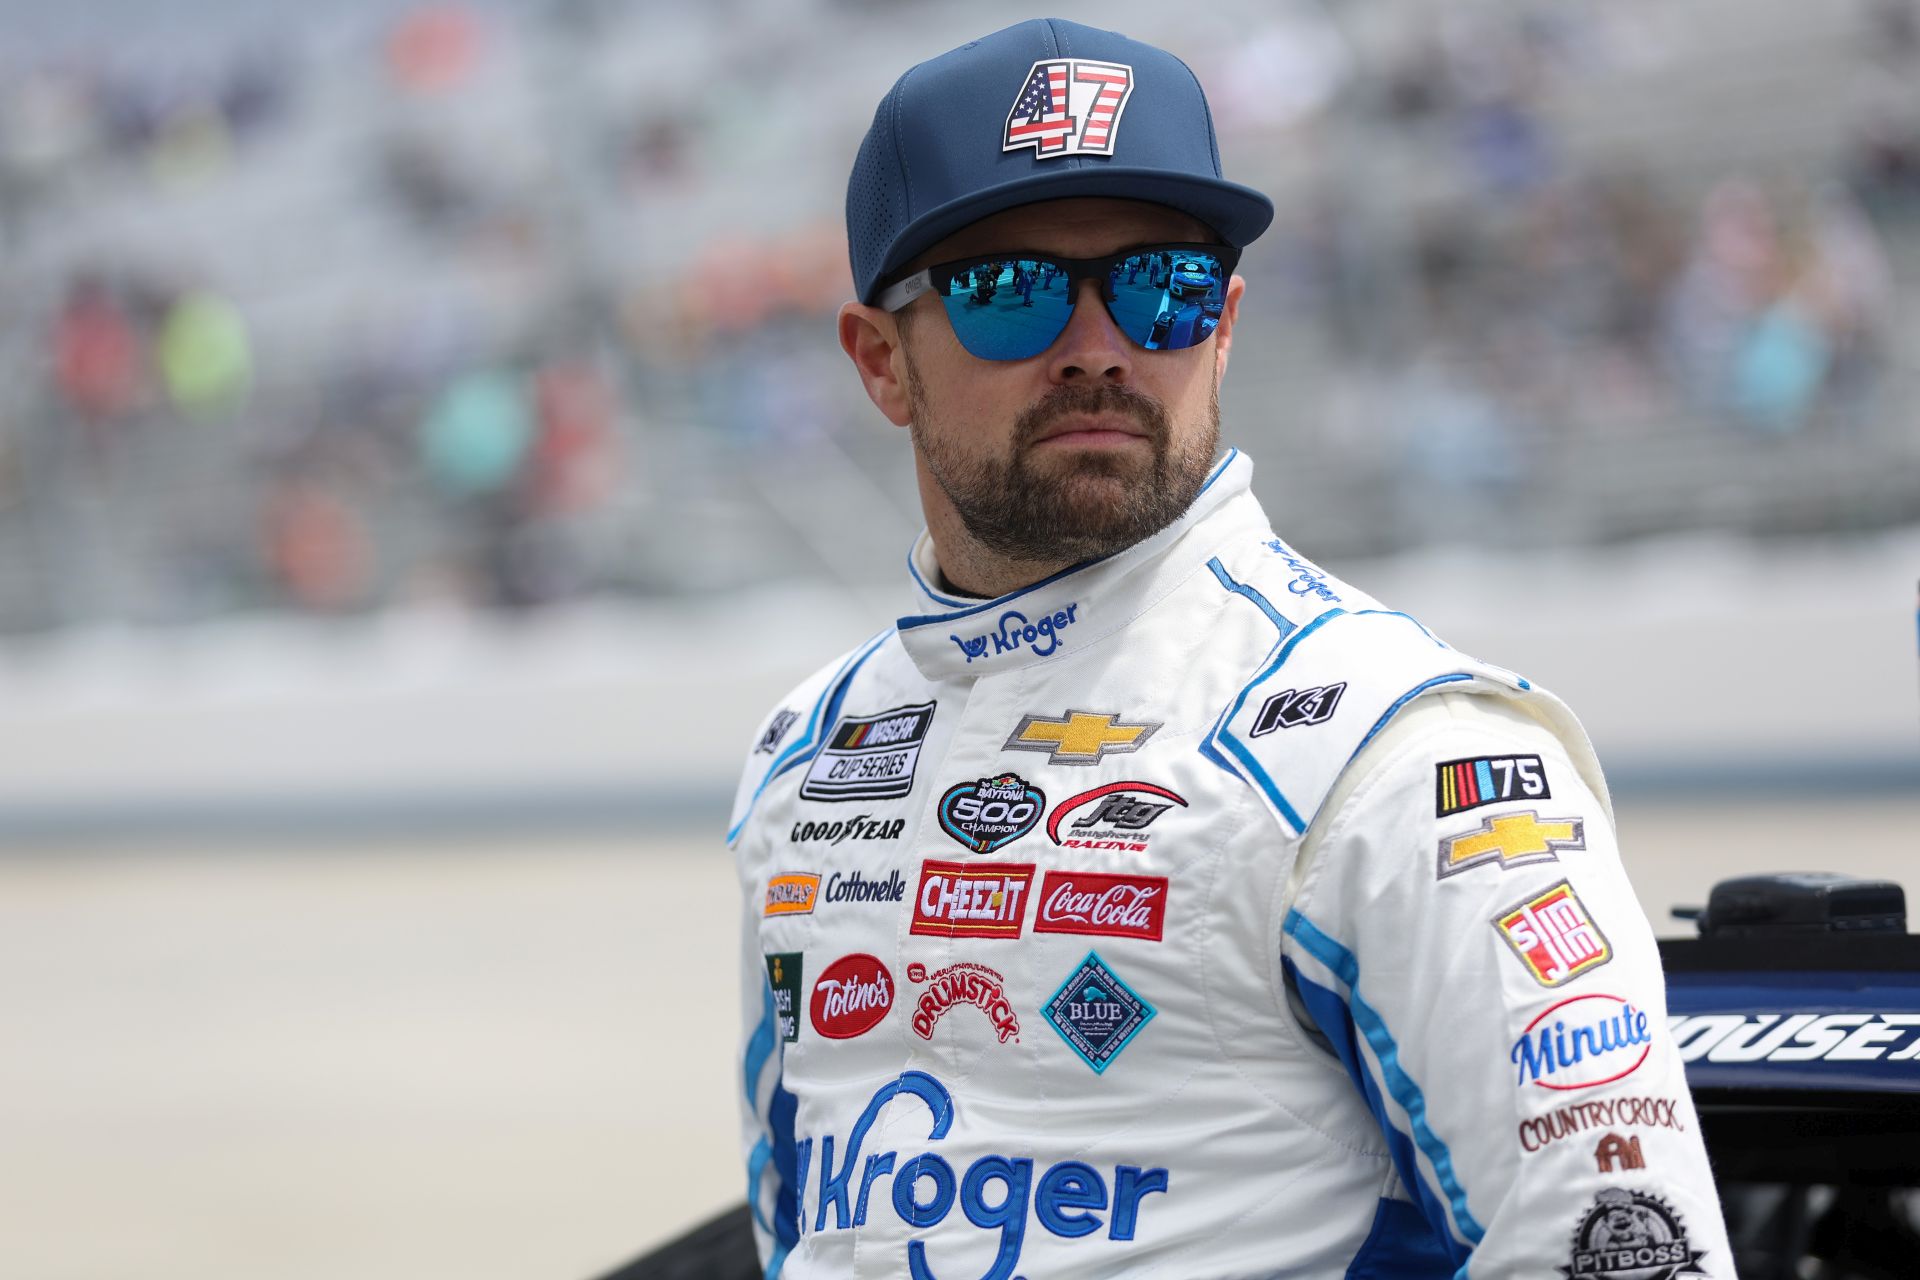 Ricky Stenhouse Jr. Punches Kyle Busch After All-Star Race